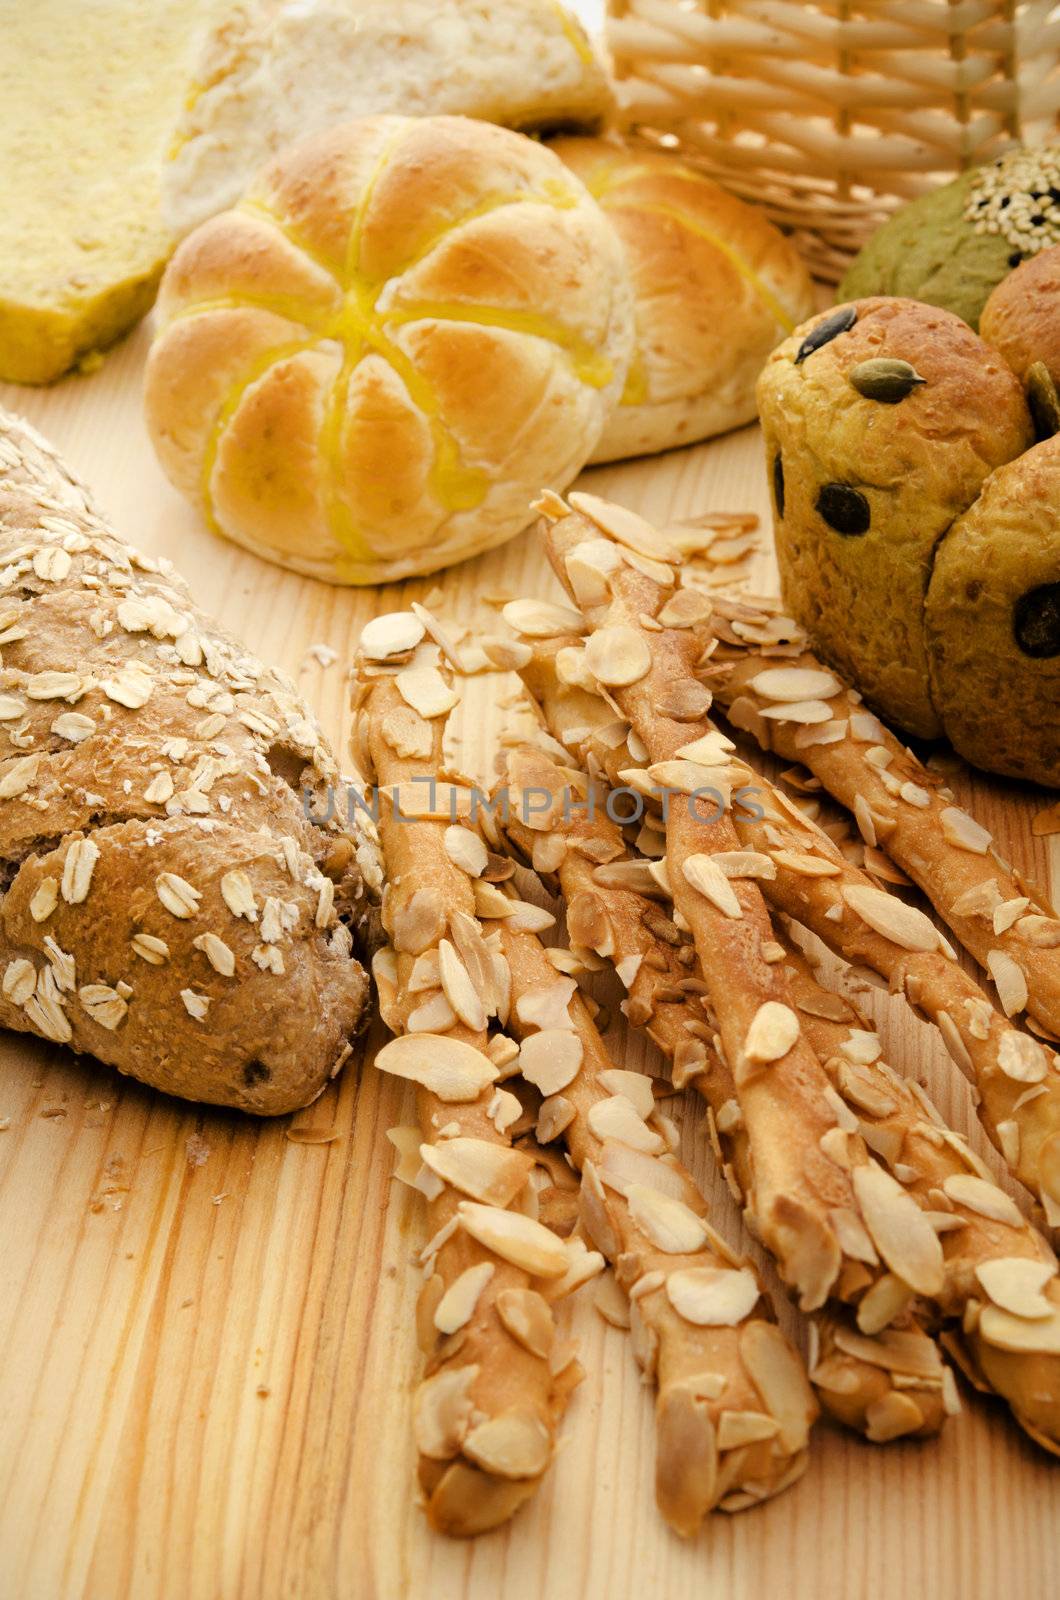 Variety of Organic Breads on plank background  by yuliang11